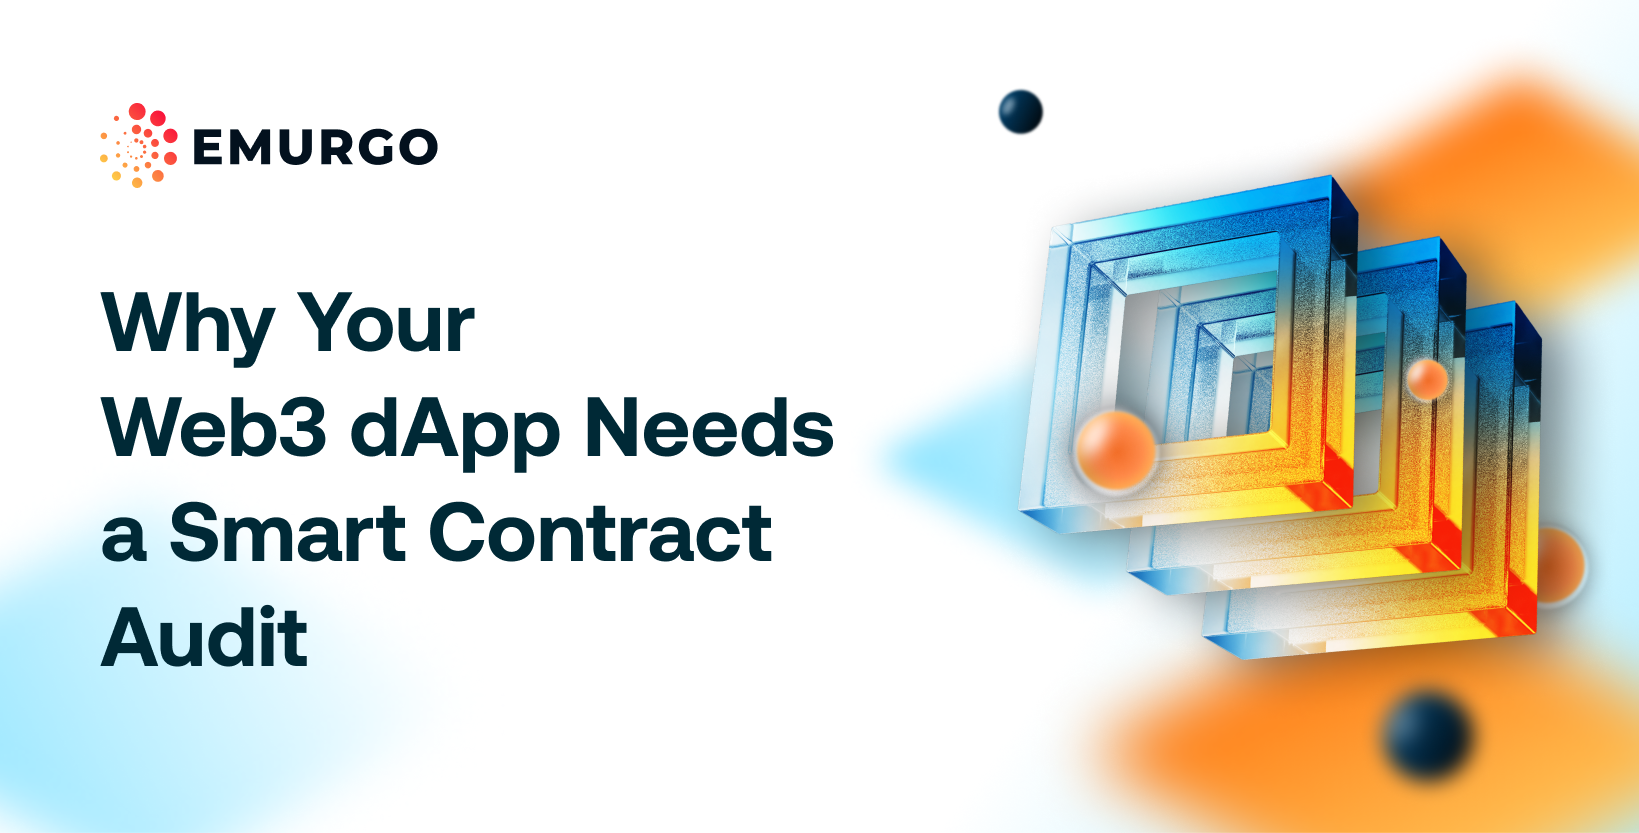 Why-Your-Web3-dApp-Needs-a-Smart-Contract-Audit-1